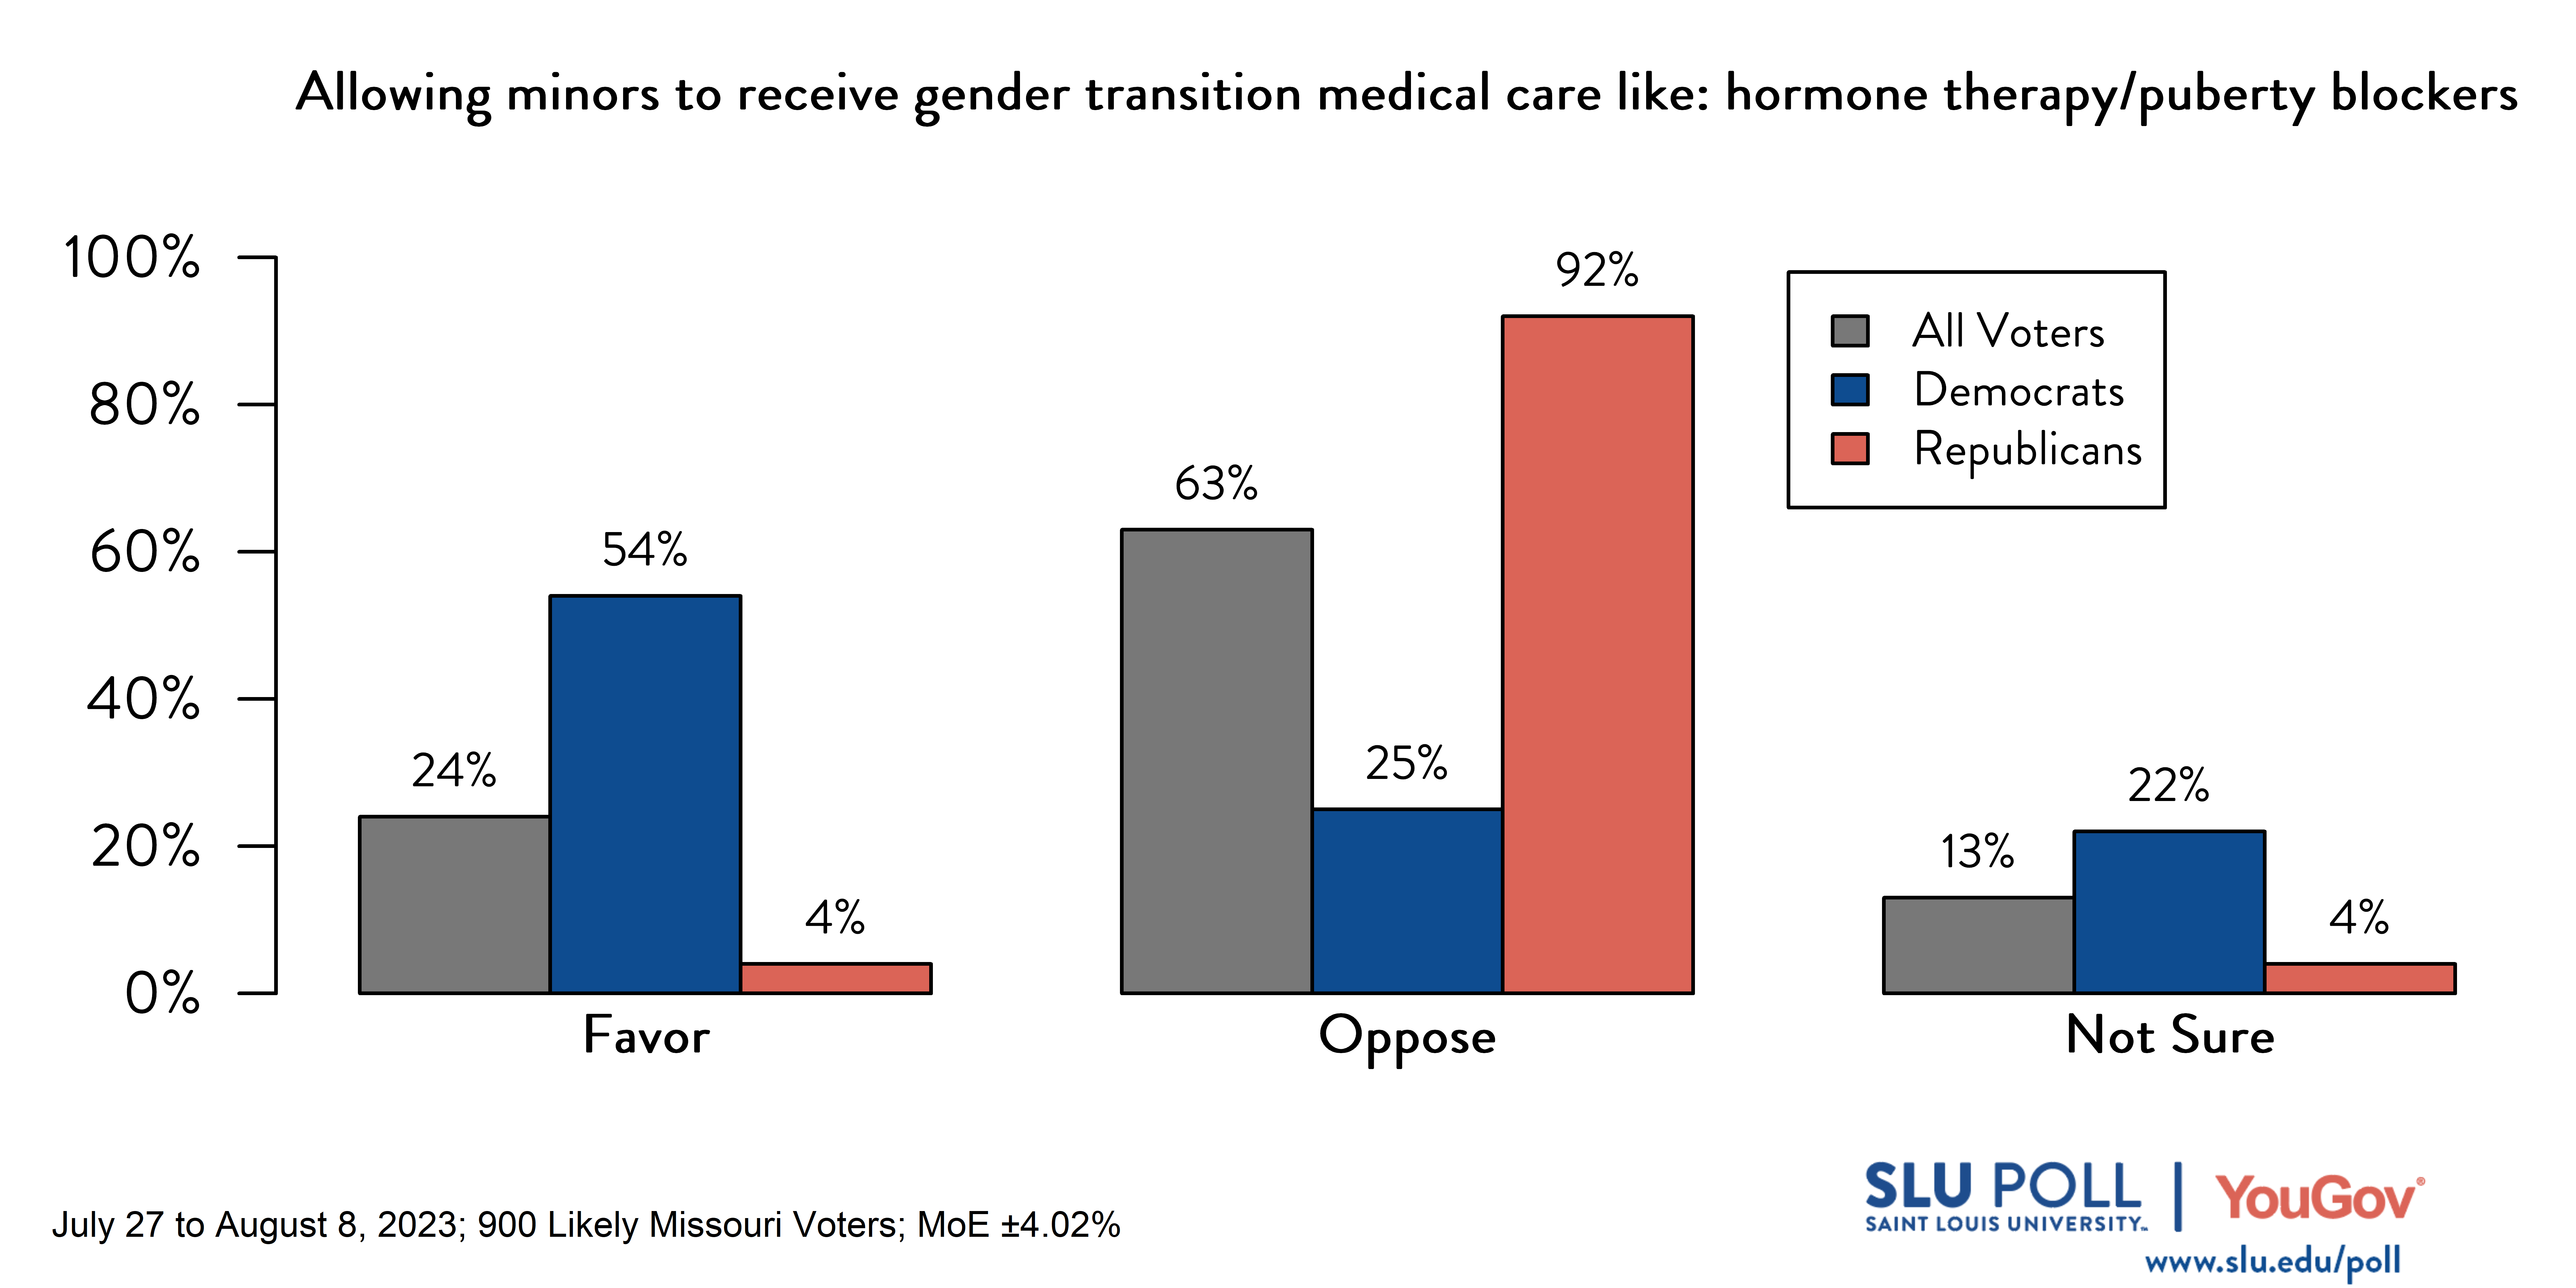 Likely voters' responses to 'Do you favor or oppose allowing someone younger than 18 to receive gender transition medical care like: hormone therapy or medication that can temporarily prevent the effects of puberty?': 24% Favor, 63% Oppose, and 13% Not Sure. Democratic voters' responses: ' 54% Favor, 25% Oppose, and 22% Not Sure. Republican voters' responses: 4% Favor, 92% Oppose, and 4% Not Sure.